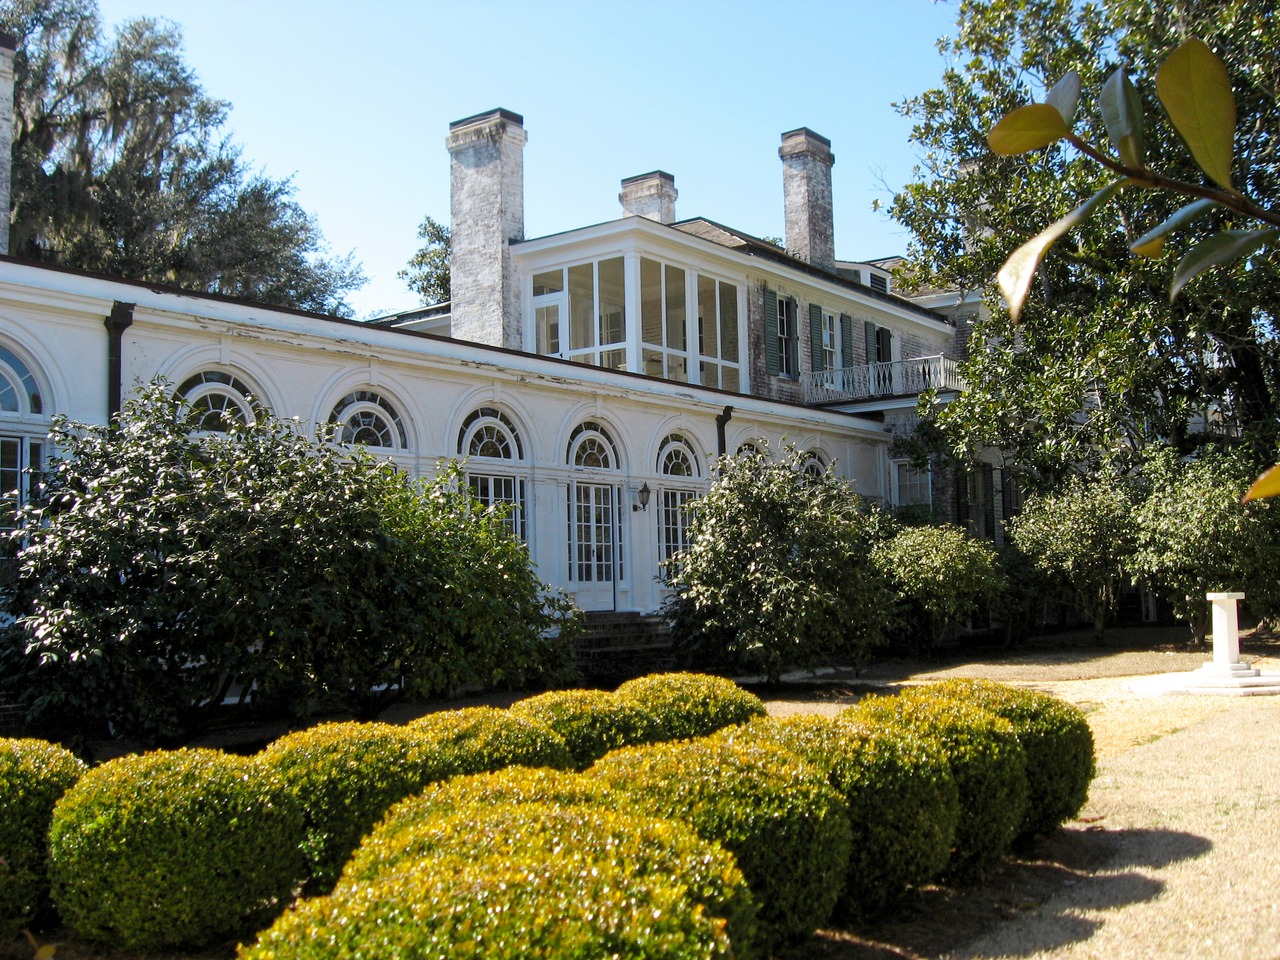 The east wing (1914) and west wing (1936) of the main house at Pebble Hill Plantation.